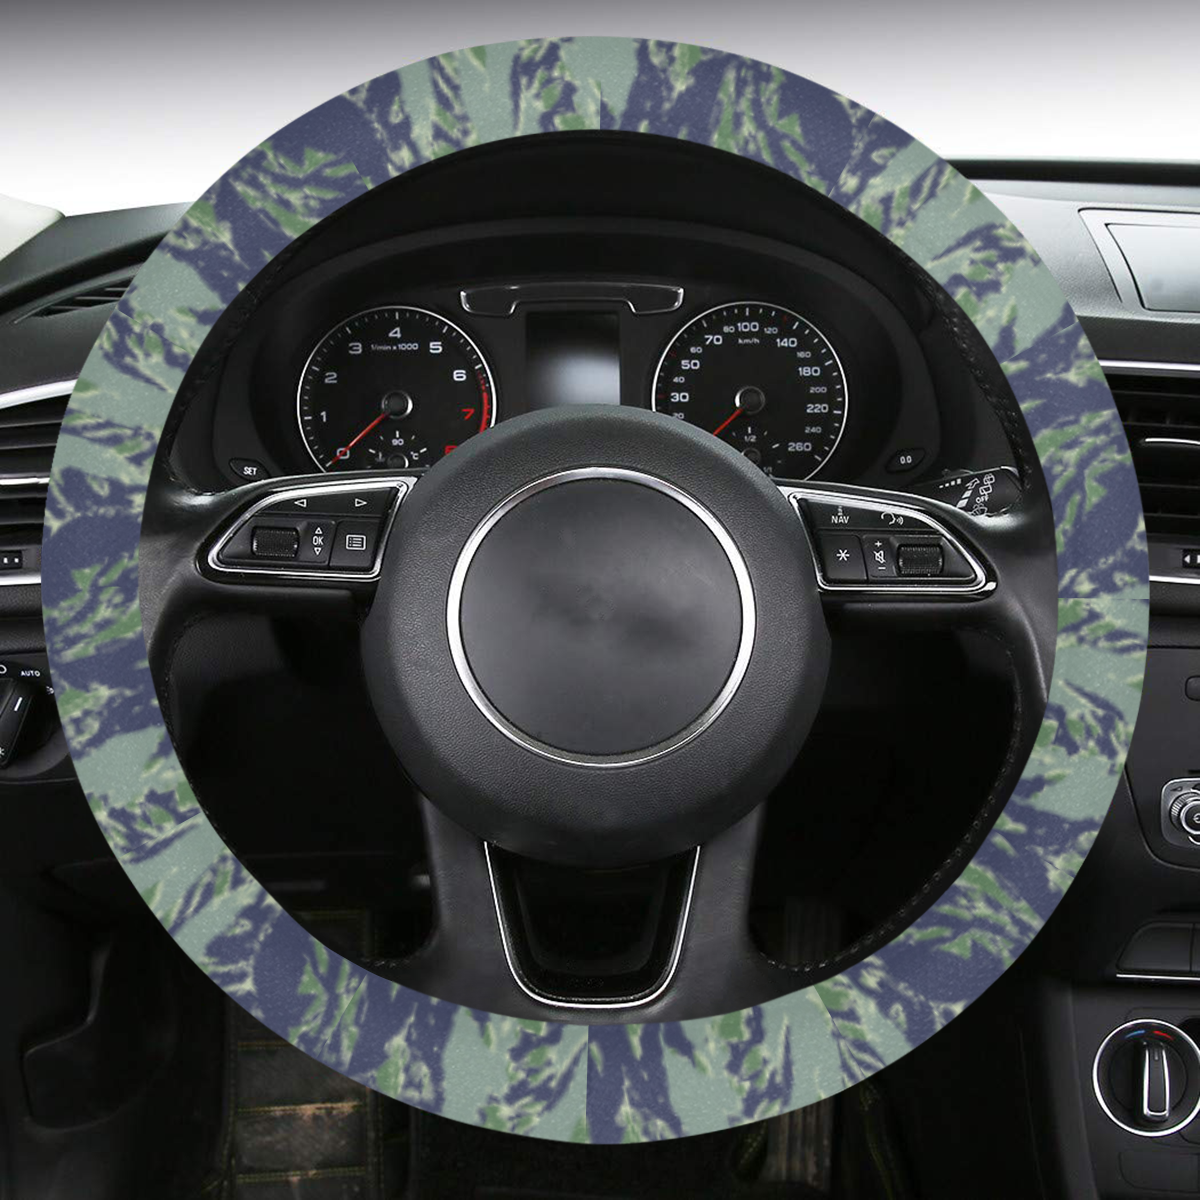 Jungle Tiger Stripe Green Camouflage Steering Wheel Cover with Anti-Slip Insert